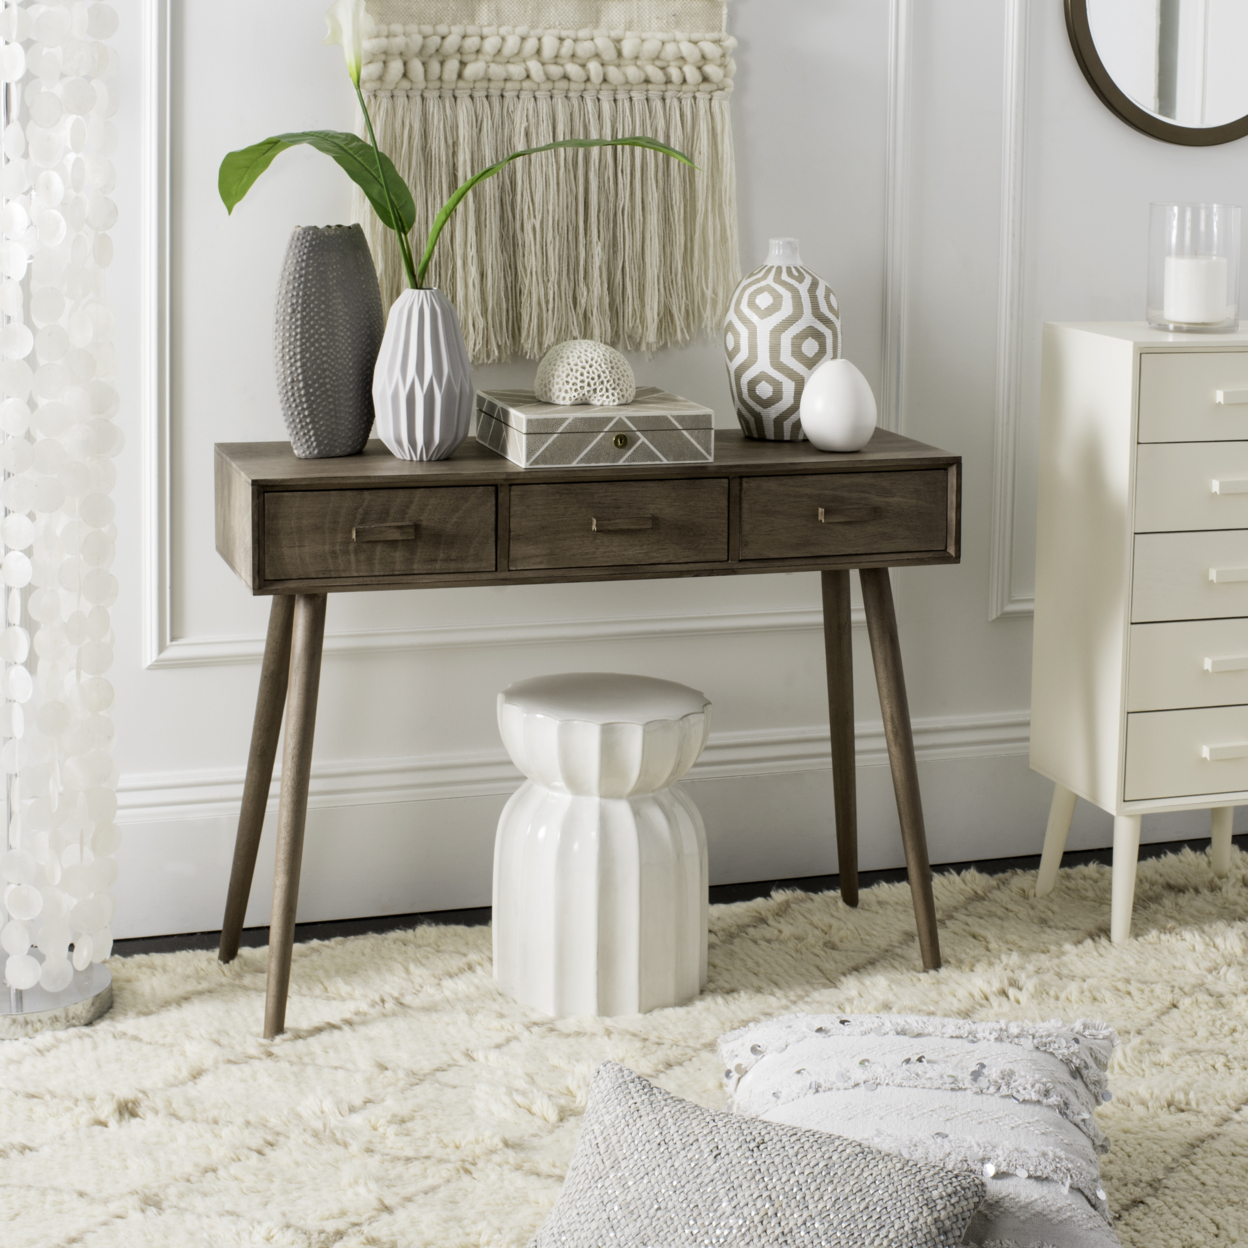 SAFAVIEH Albus 3-Drawer Console Table Chocolate